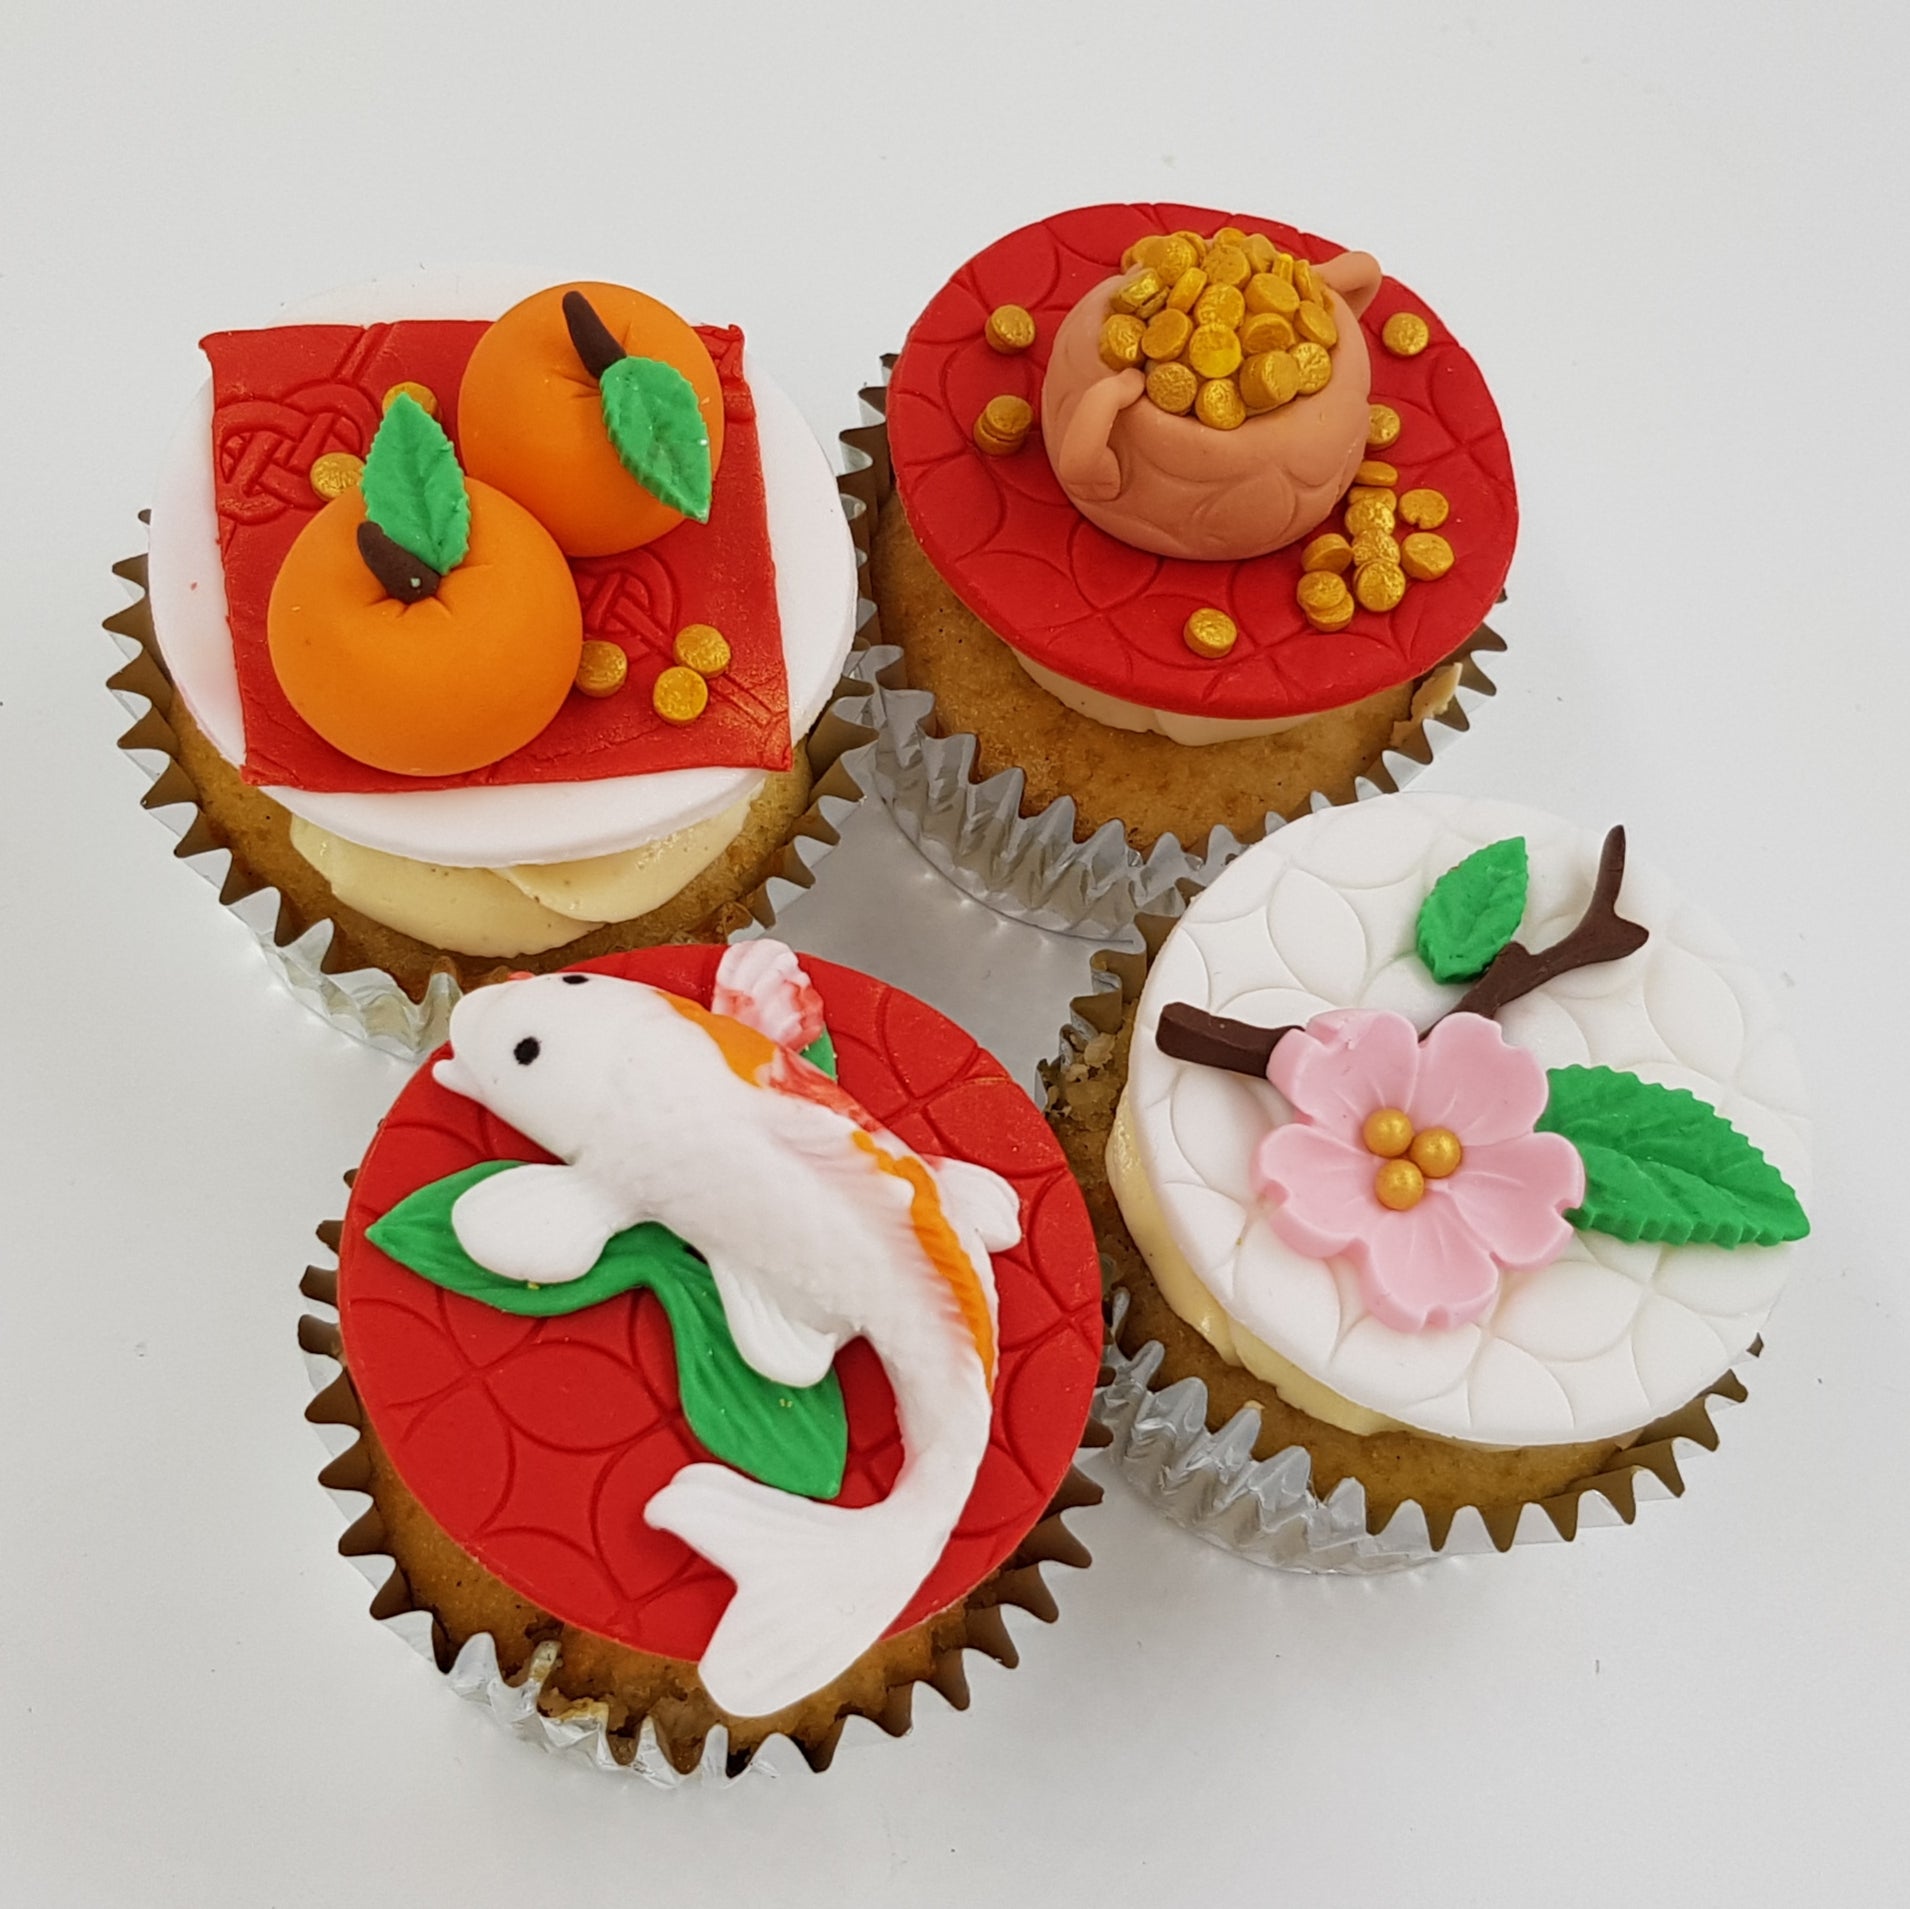 CNY Cupcakes - Auspicious Beginnings (Box of 12) - Cuppacakes - Singapore's Very Own Cupcakes Shop